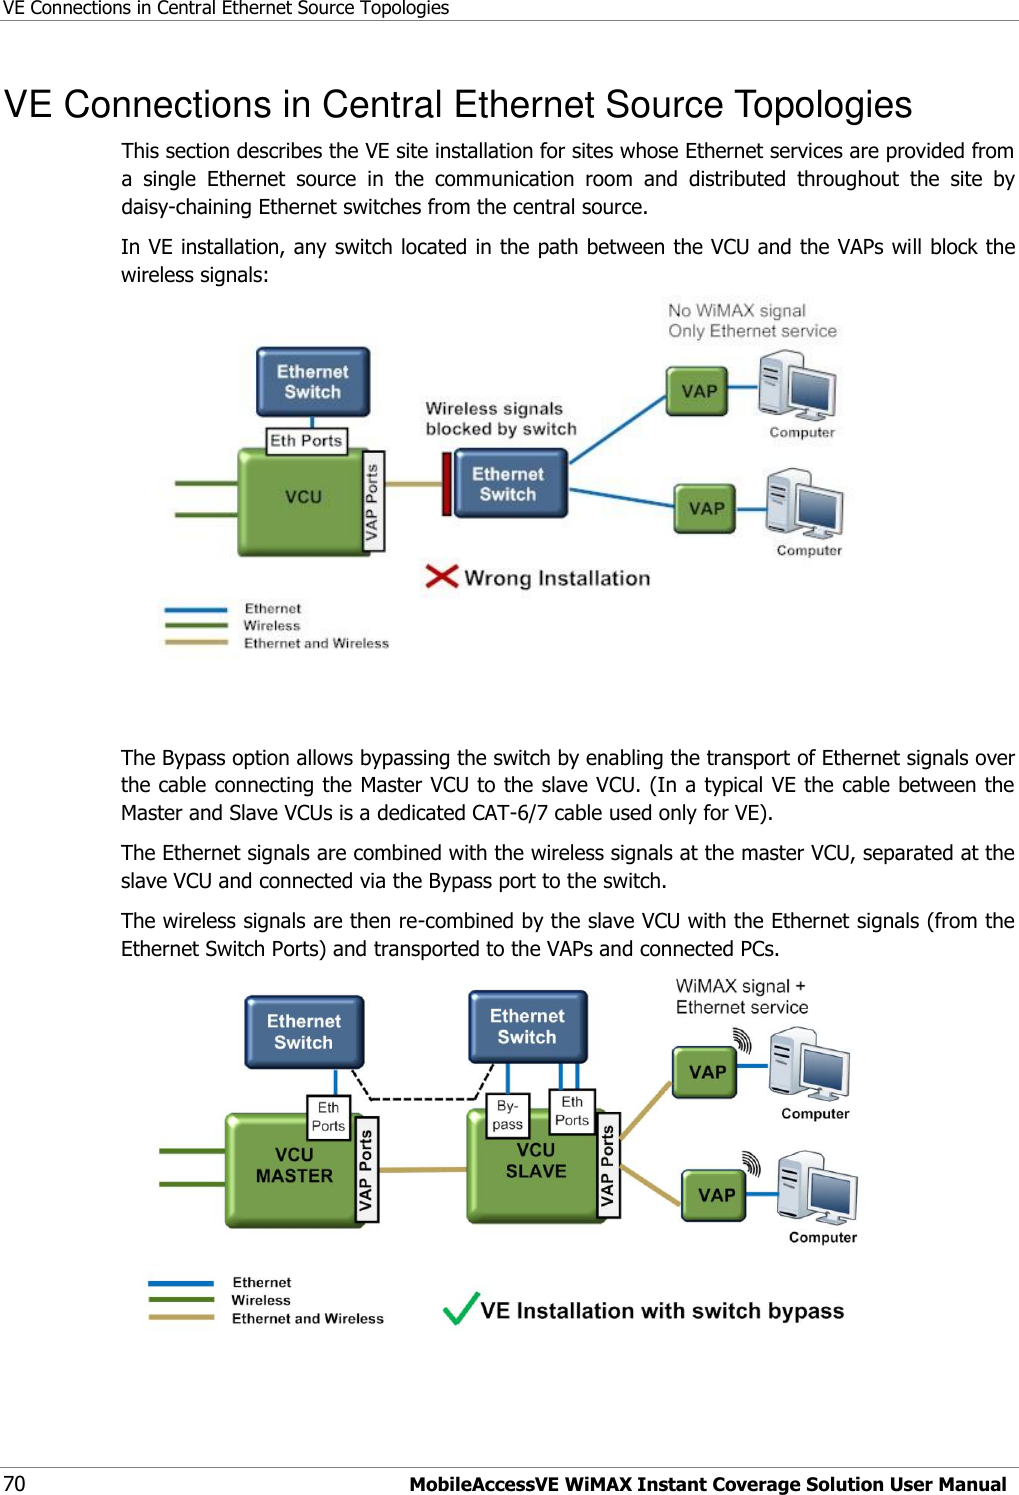 VE Connections in Central Ethernet Source Topologies 70 MobileAccessVE WiMAX Instant Coverage Solution User Manual VE Connections in Central Ethernet Source Topologies This section describes the VE site installation for sites whose Ethernet services are provided from a  single  Ethernet  source  in  the  communication  room  and  distributed  throughout  the  site  by daisy-chaining Ethernet switches from the central source.   In VE installation, any switch located in the path between the VCU and the VAPs will block the wireless signals:    The Bypass option allows bypassing the switch by enabling the transport of Ethernet signals over the cable connecting the Master VCU to the slave VCU. (In a typical VE the cable between the Master and Slave VCUs is a dedicated CAT-6/7 cable used only for VE). The Ethernet signals are combined with the wireless signals at the master VCU, separated at the slave VCU and connected via the Bypass port to the switch. The wireless signals are then re-combined by the slave VCU with the Ethernet signals (from the Ethernet Switch Ports) and transported to the VAPs and connected PCs.  